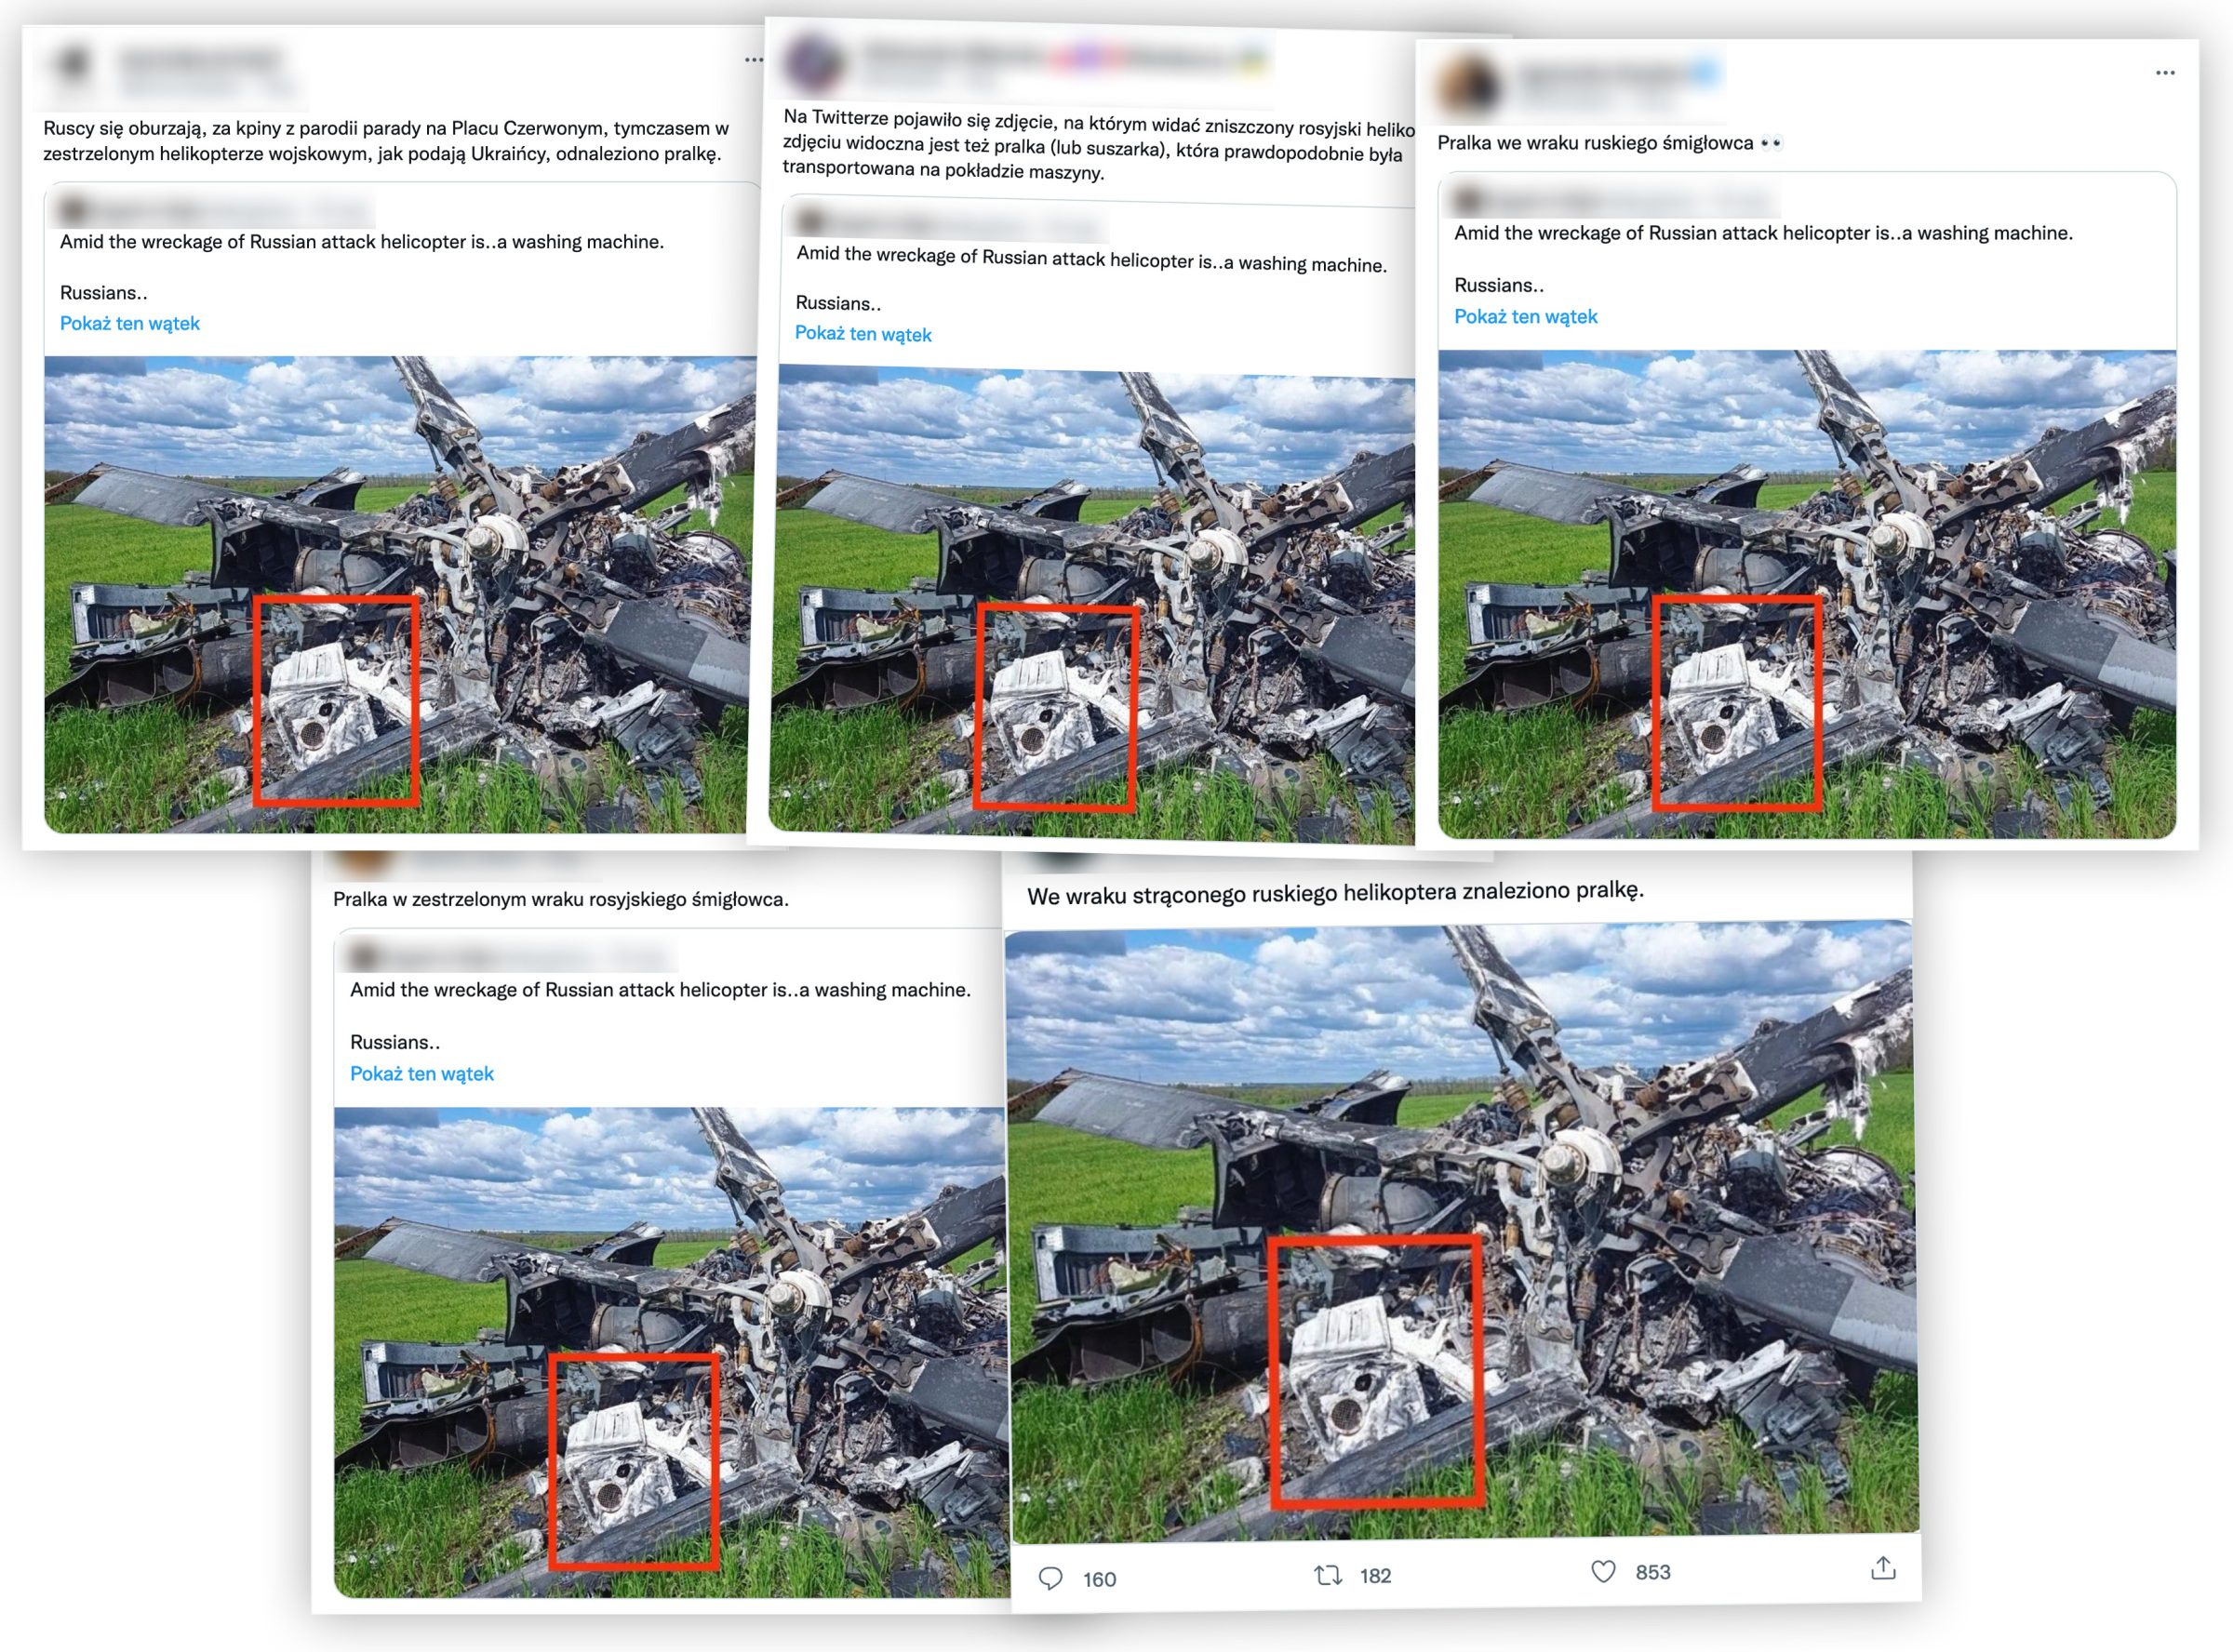 Sample entries with a picture of a helicopter and suggestions about the washing machine